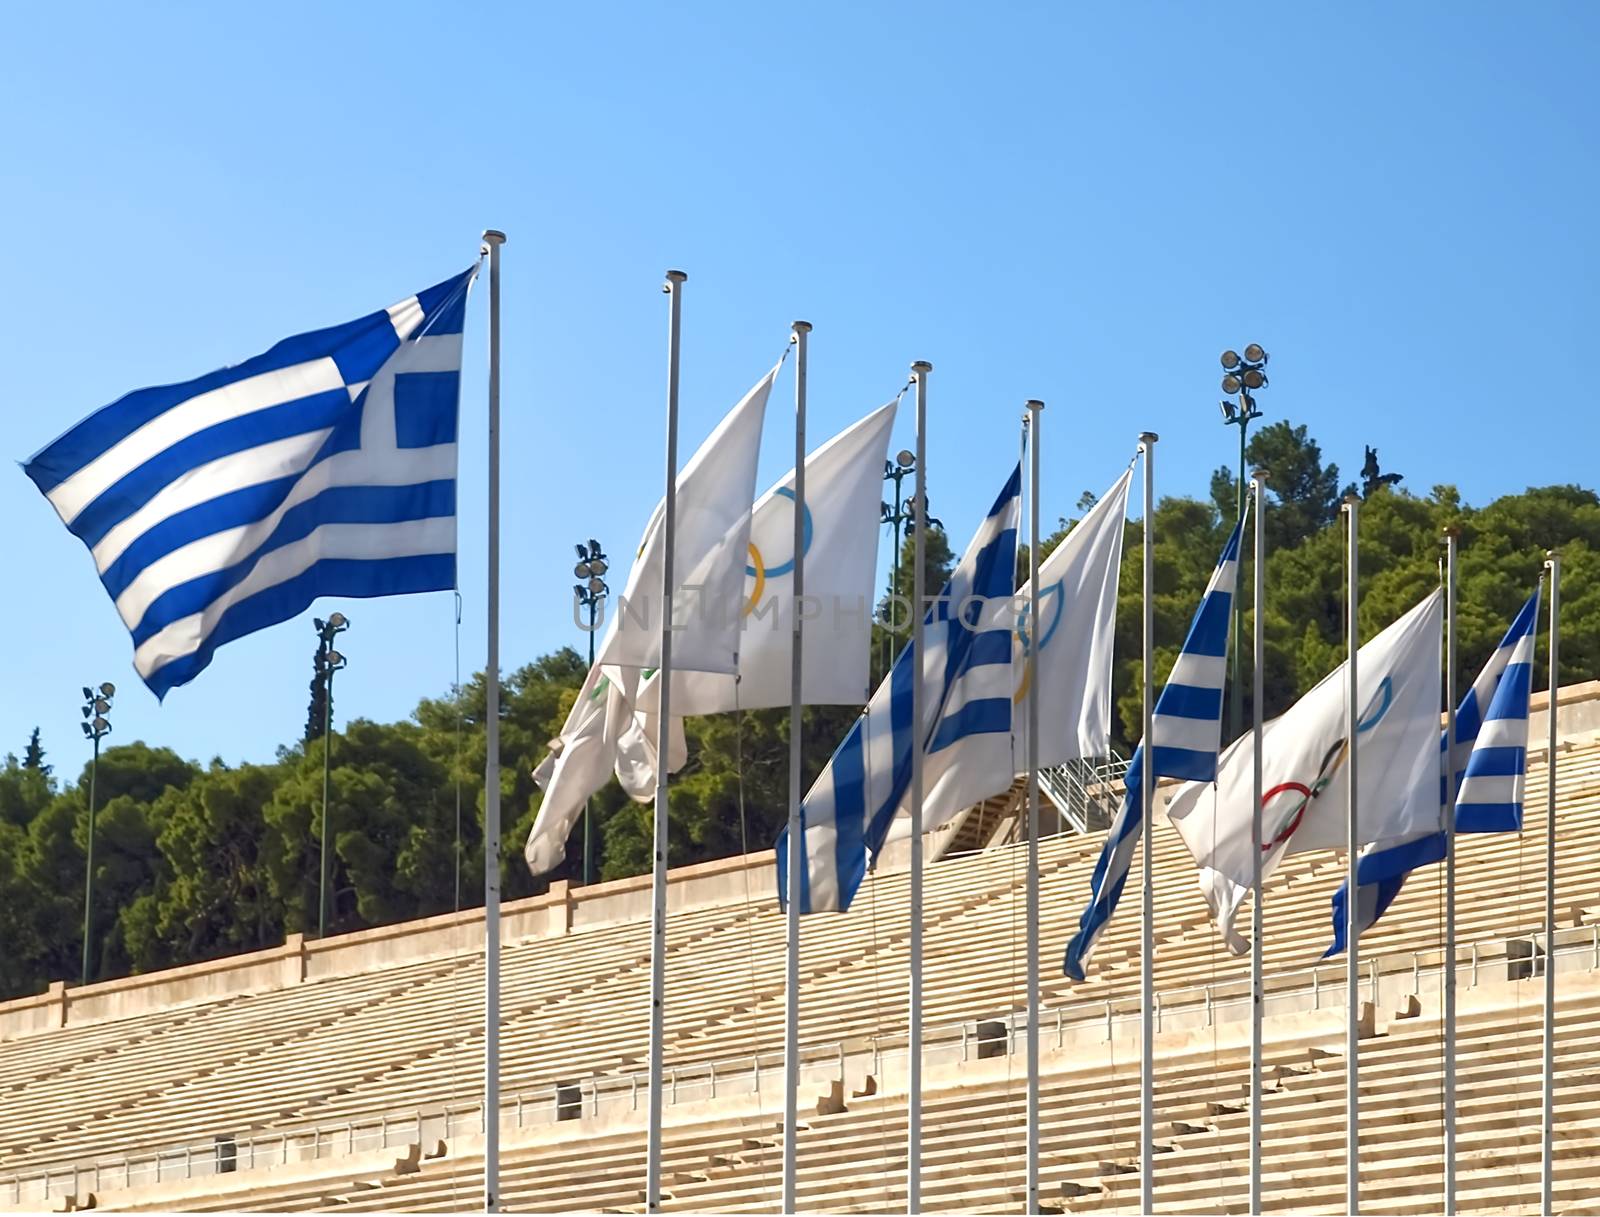 The historic olympic stadium with flags in Athens by Stimmungsbilder